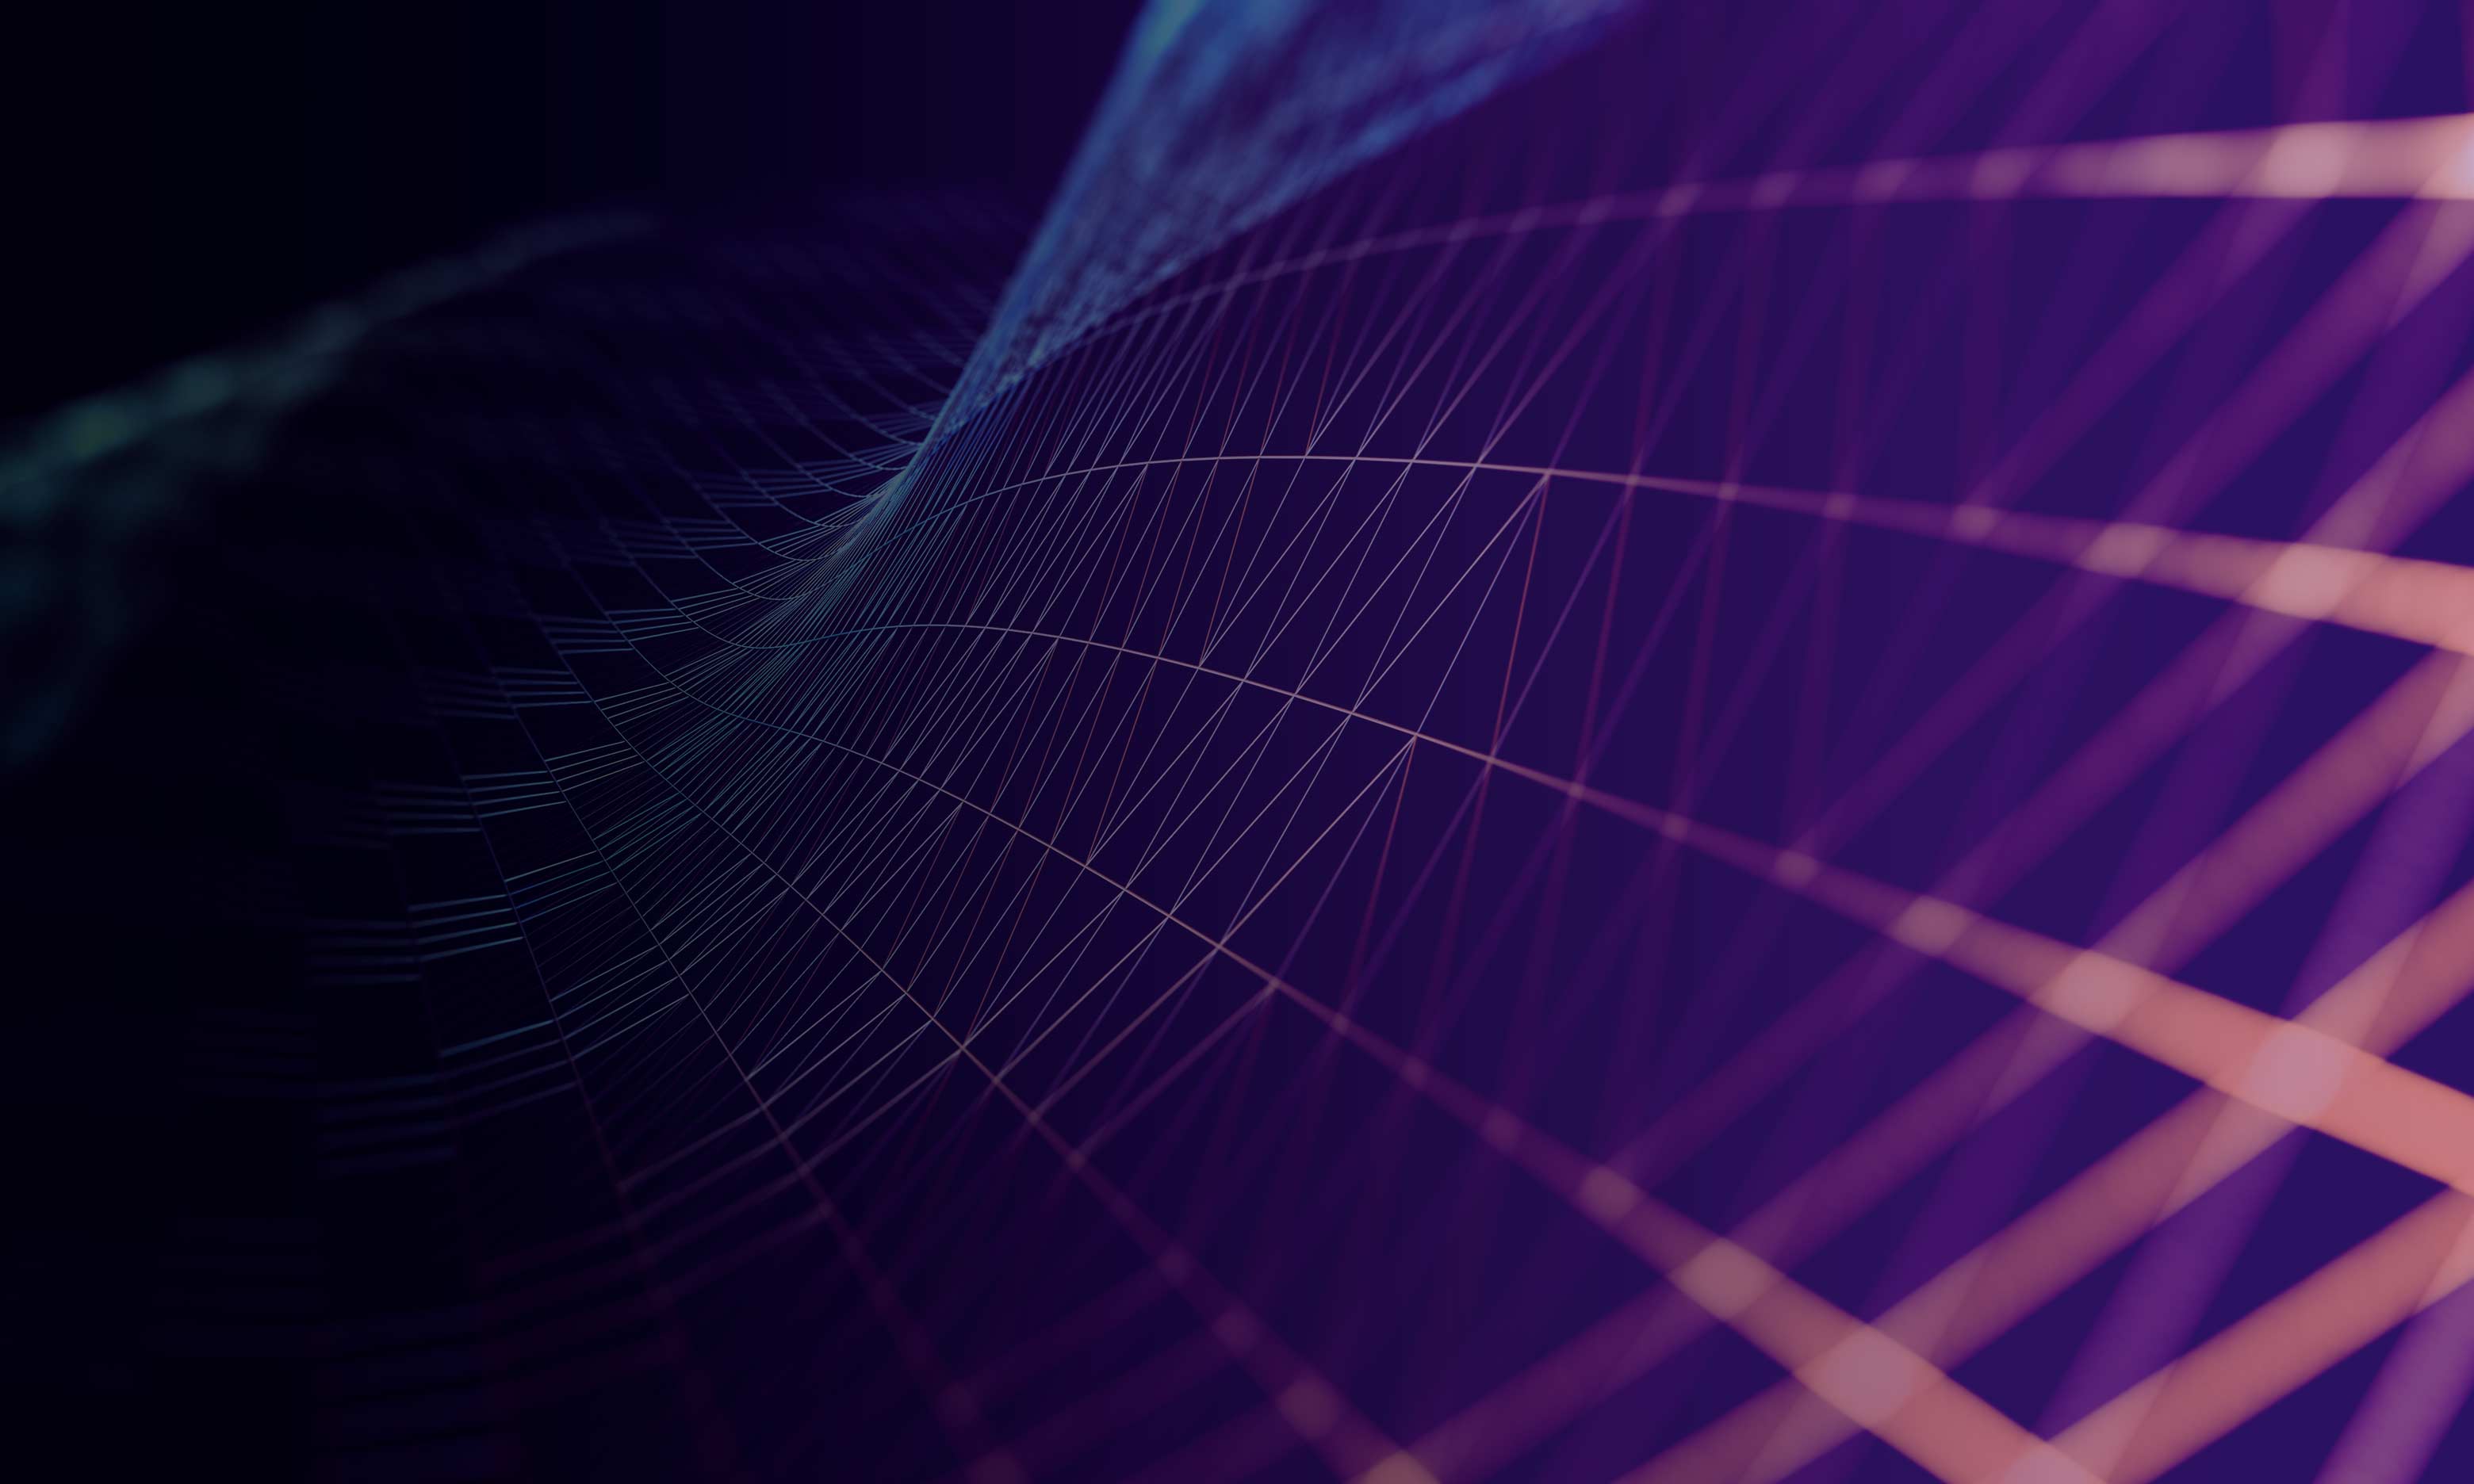 Abstract purple and blue image - displaying triangles connecting